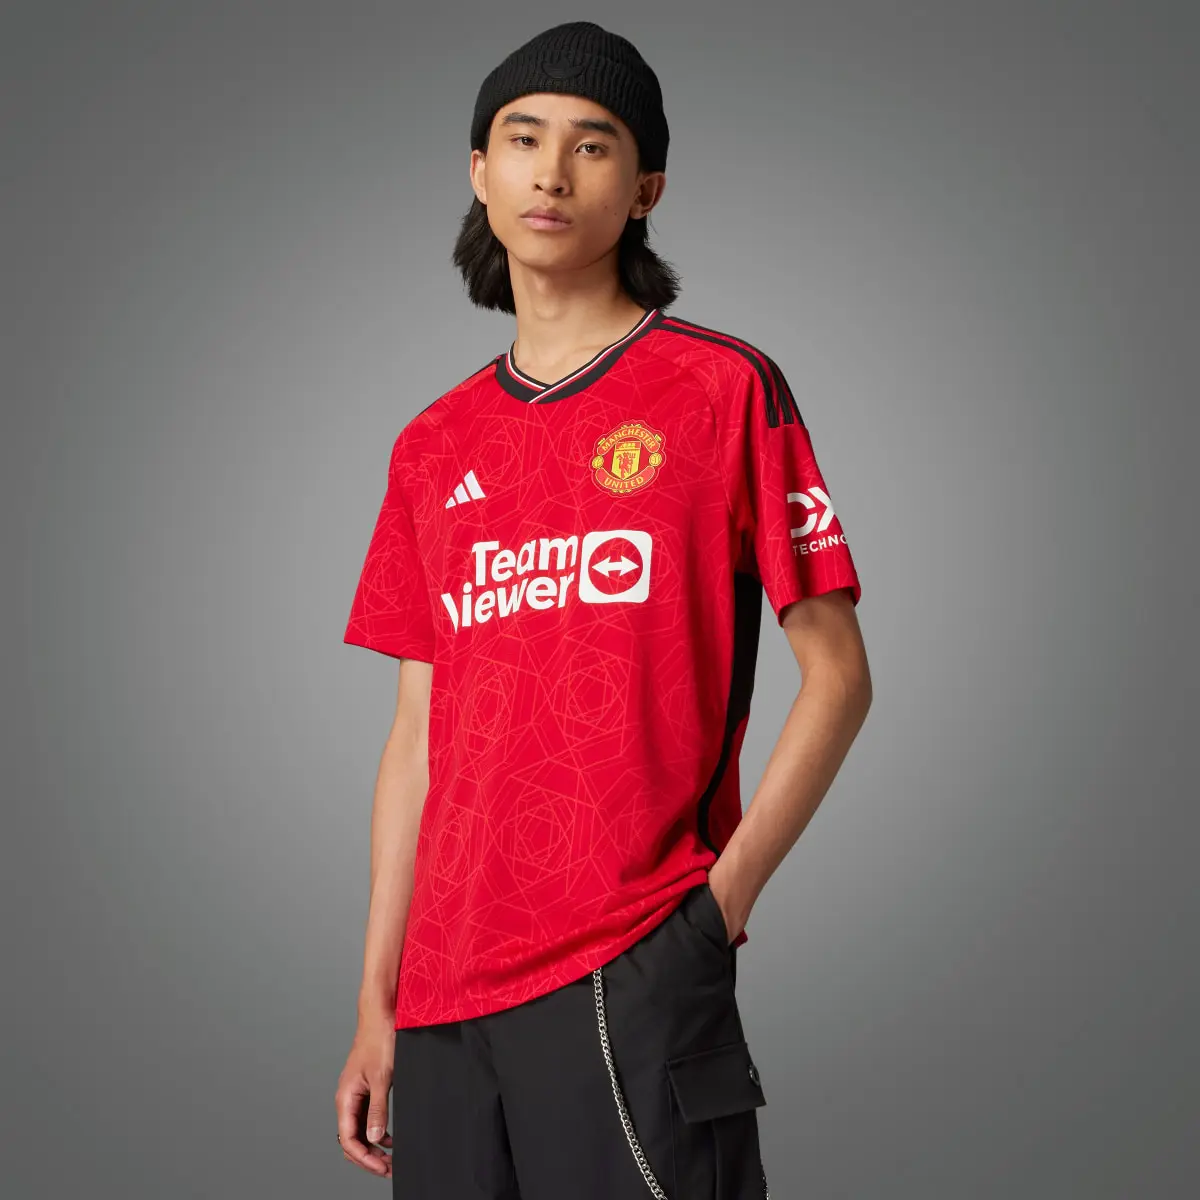 Adidas Jersey Local Manchester United 23/24. 1